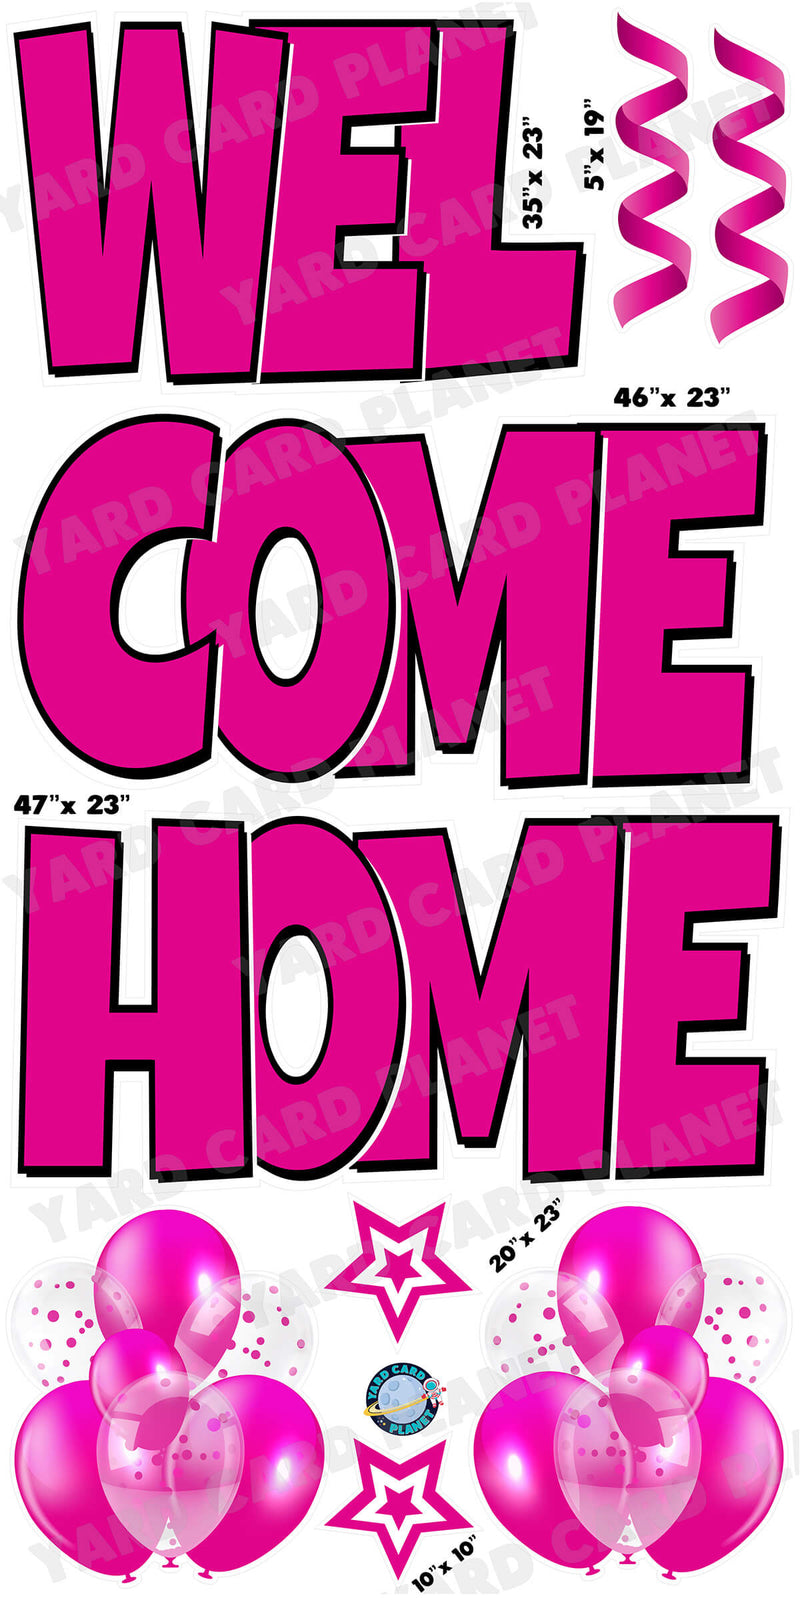 Large 23" Welcome Home Yard Card EZ Quick Sets in Luckiest Guy Font and Flair in Hot Pink Solid Color